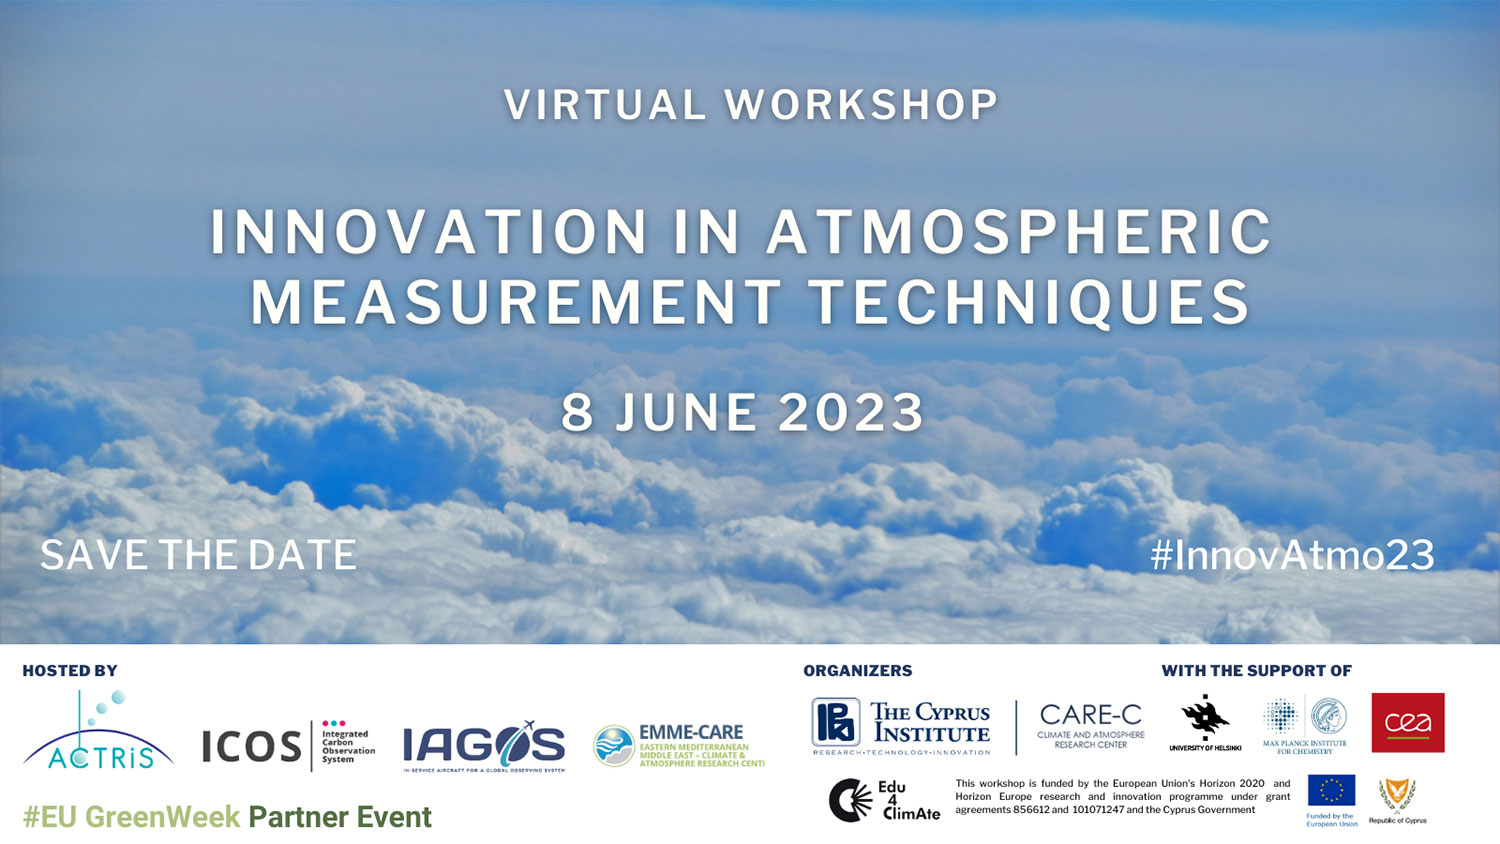 Innovation in Atmospheric Measurement Techniques: a virtual workshop on 8 June 2023